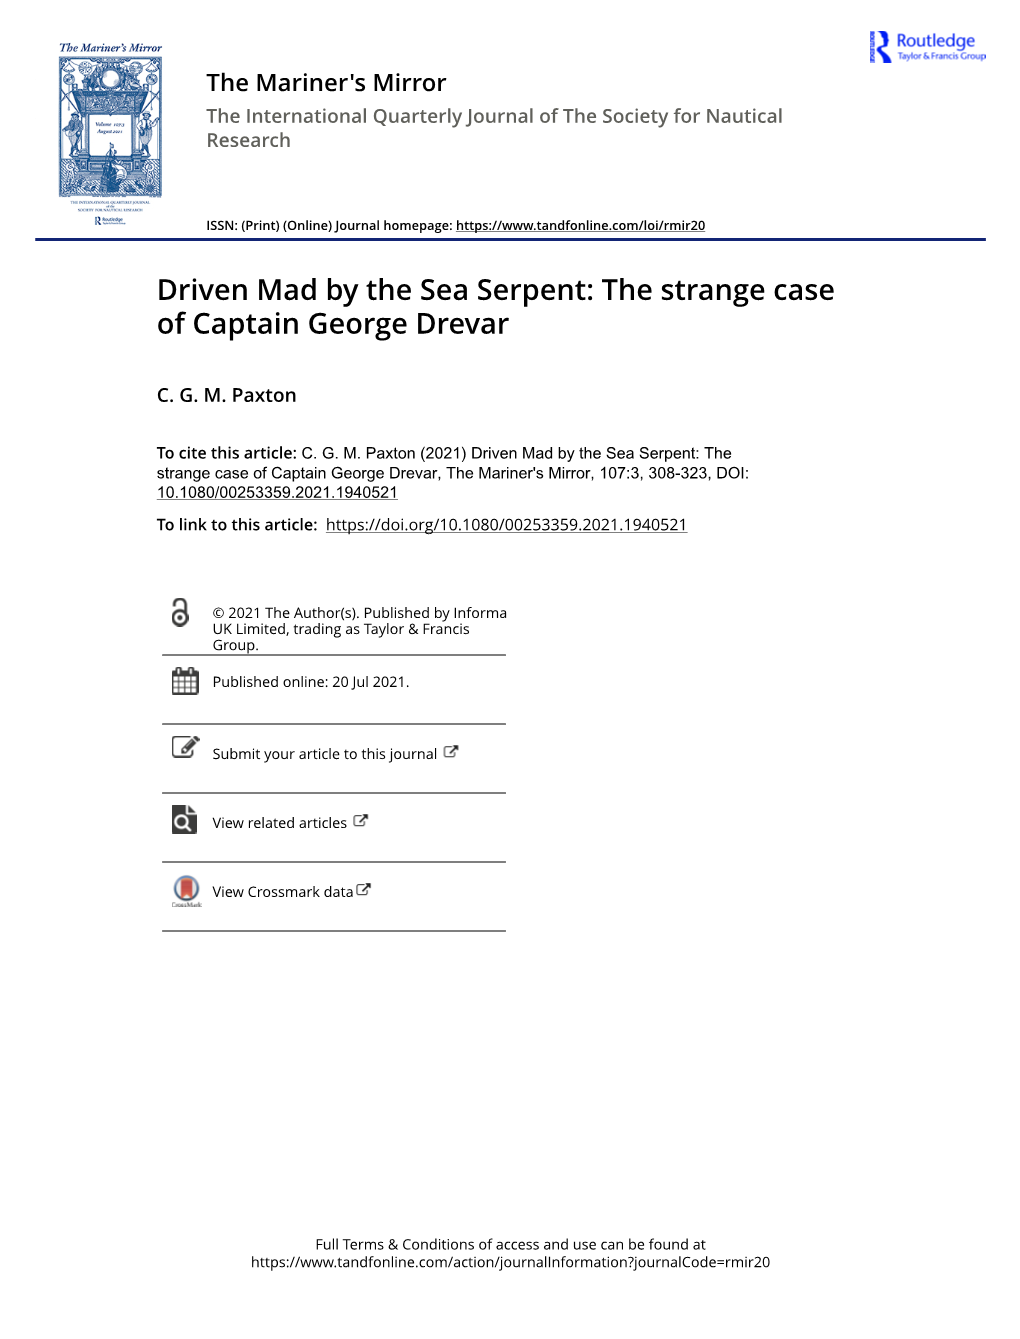 Driven Mad by the Sea Serpent: the Strange Case of Captain George Drevar